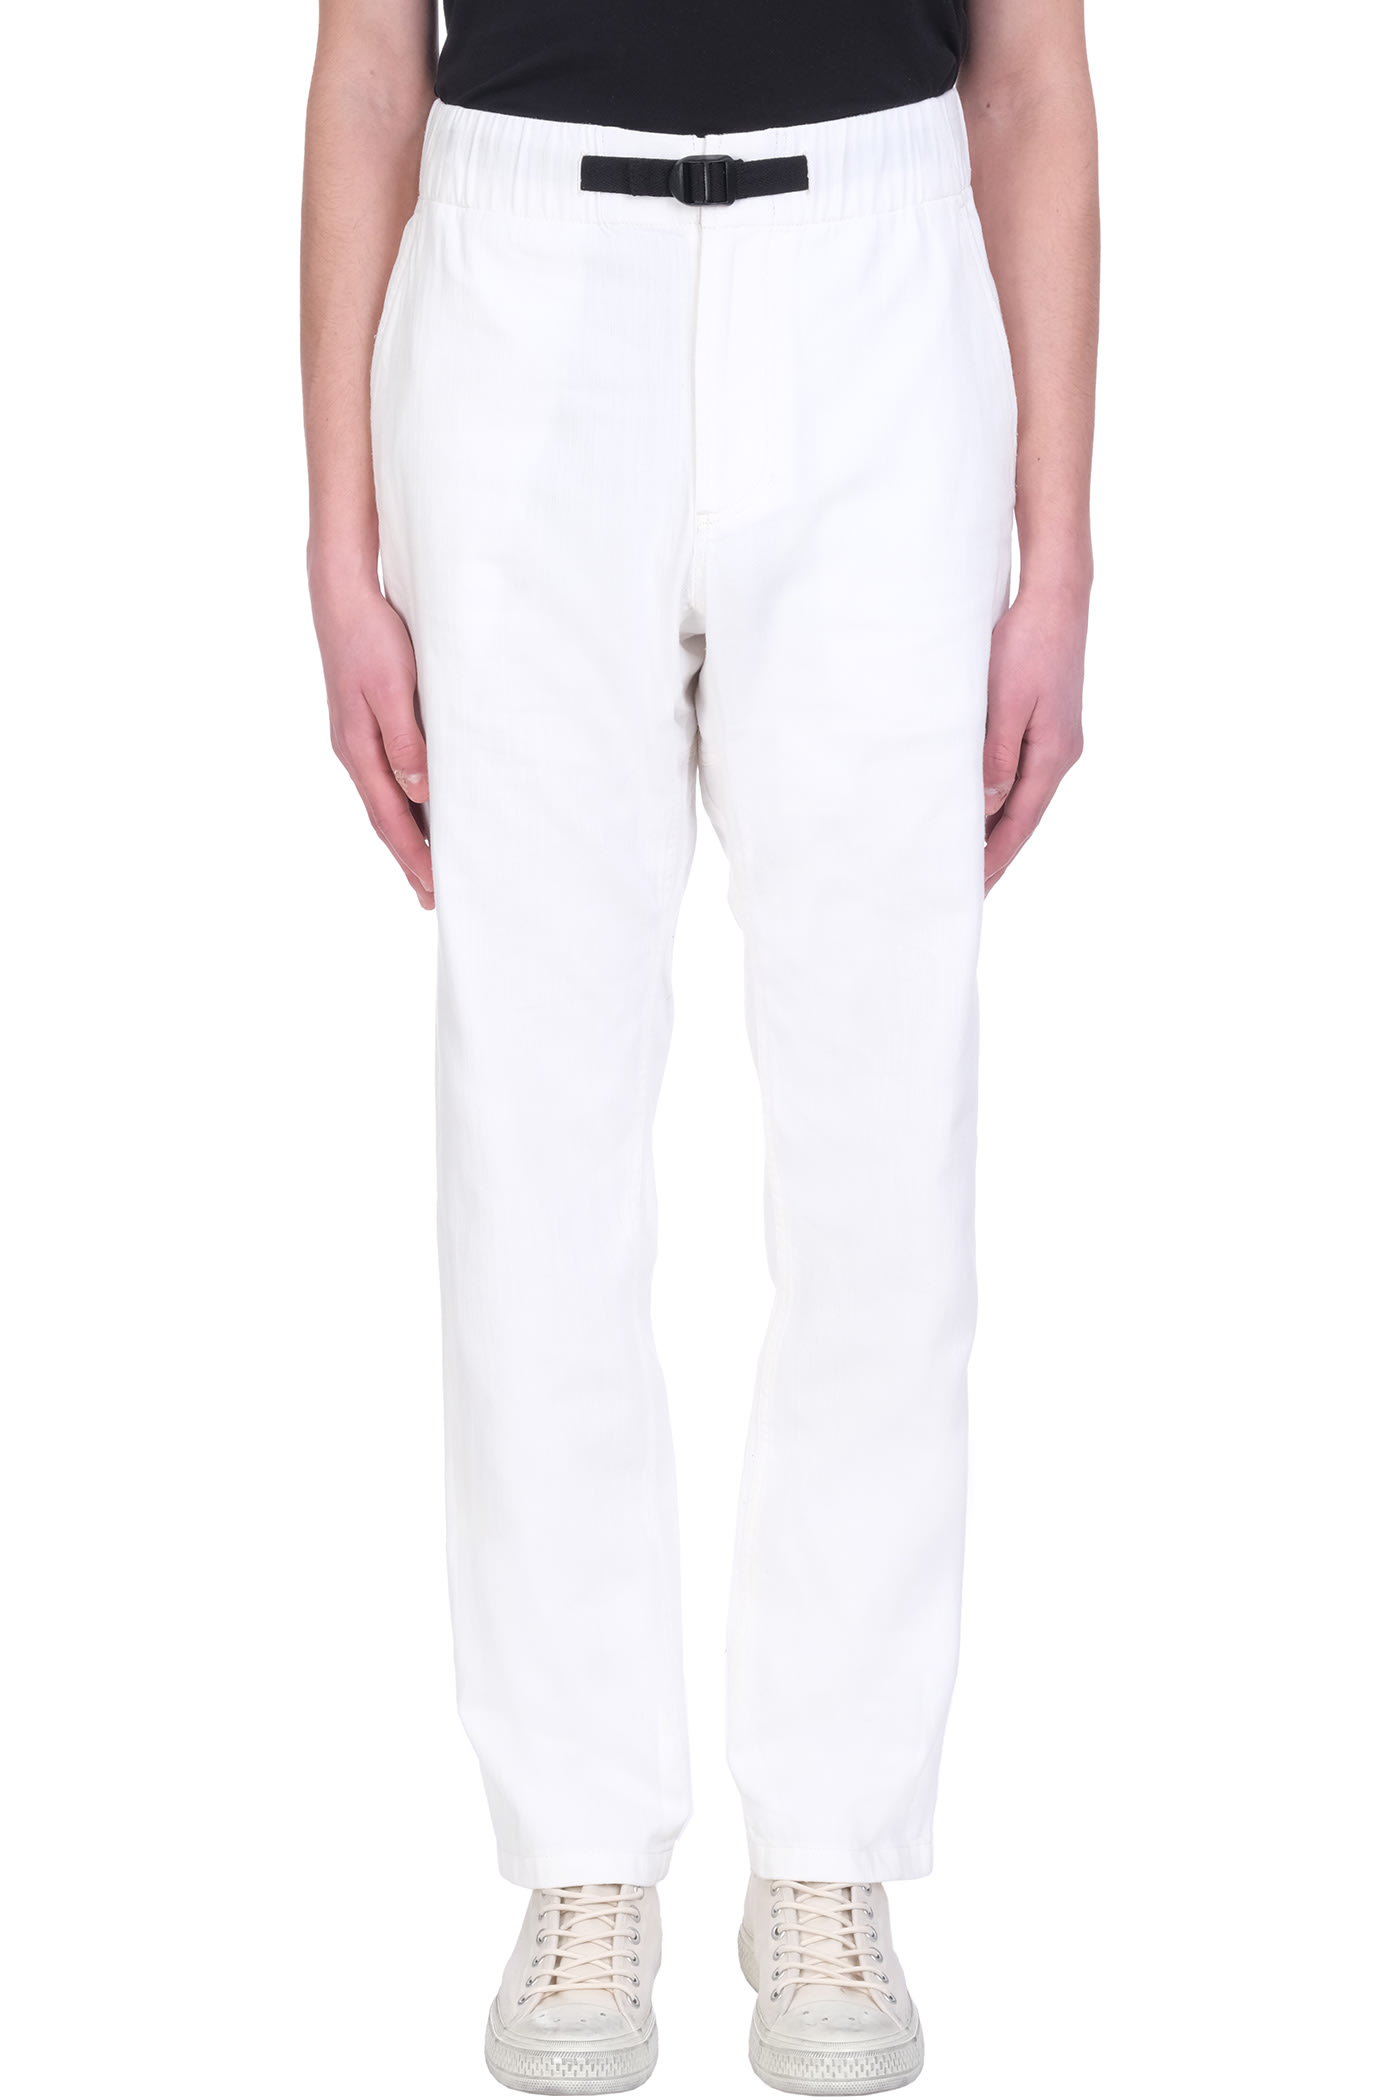 A.P.C. Youri Pants In White Cotton